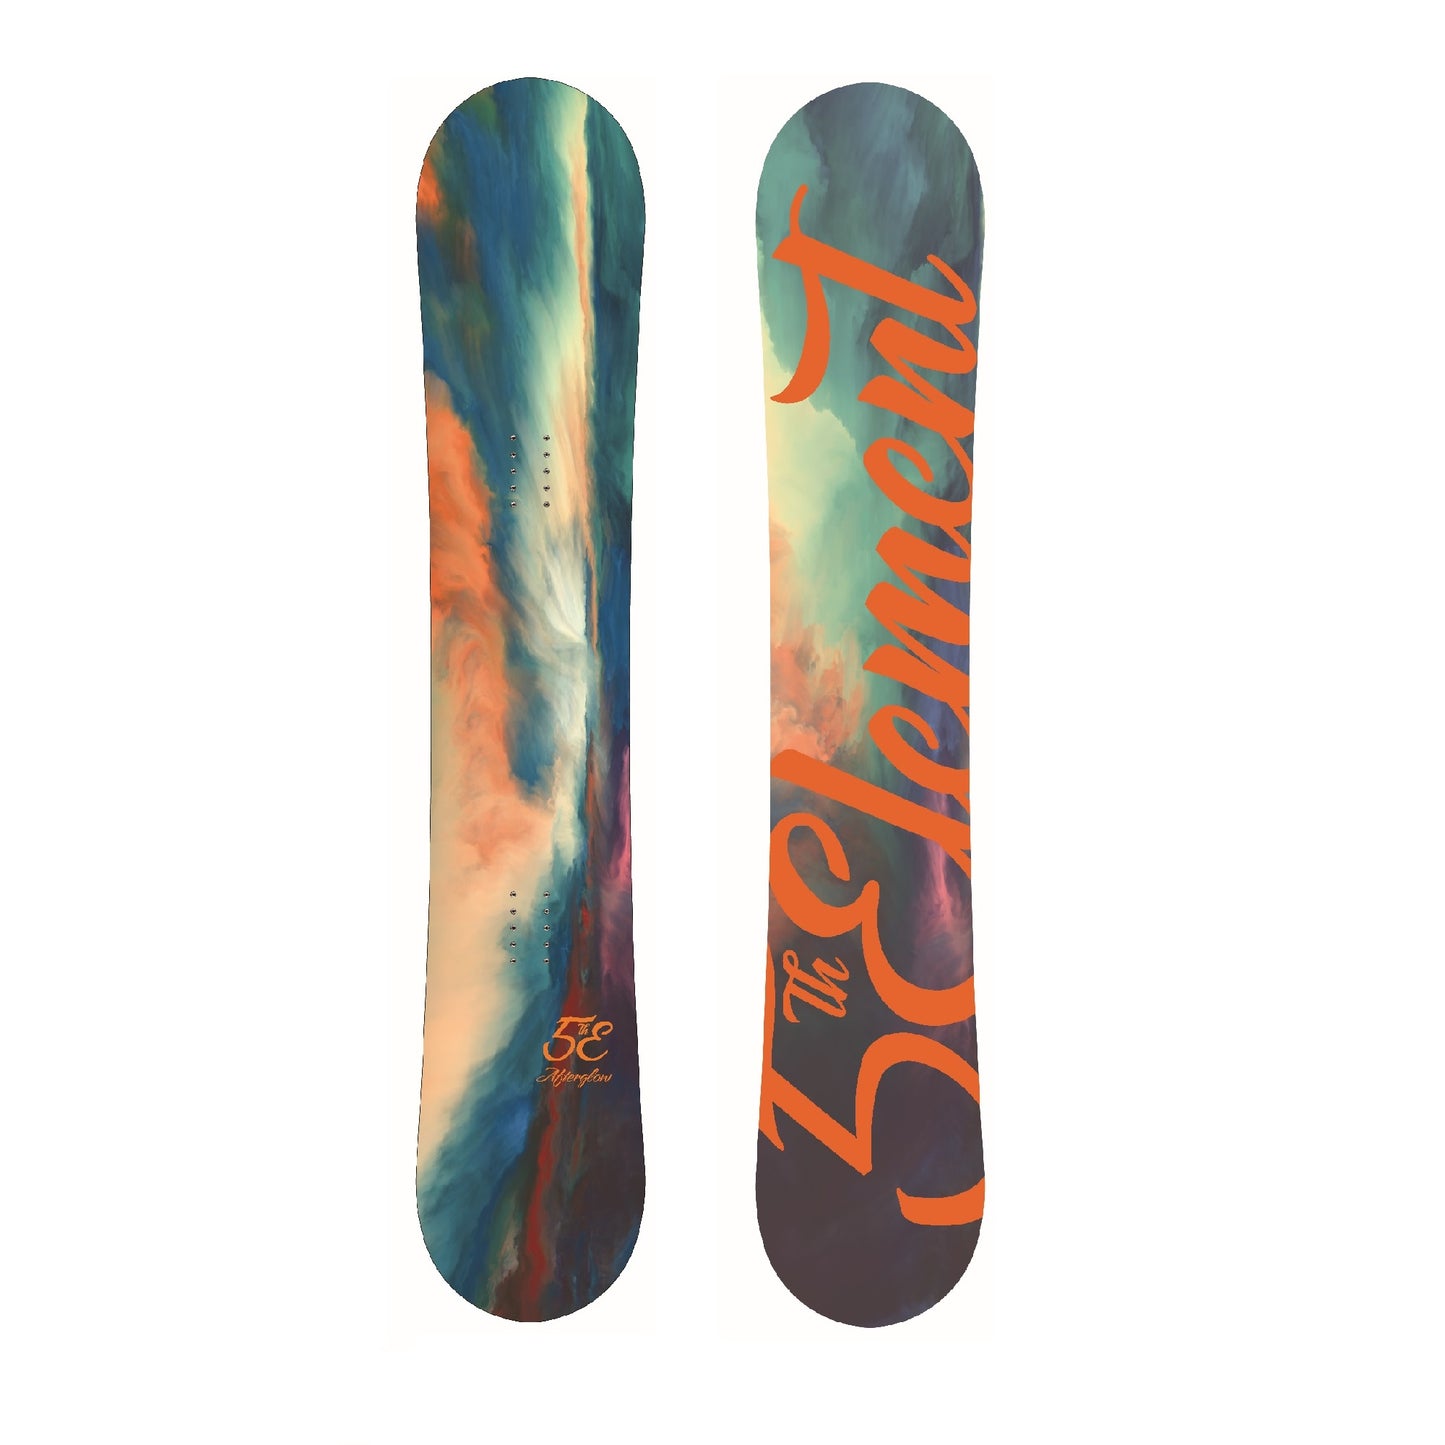 5th Element Afterglow Snowboard Package - White/Teal